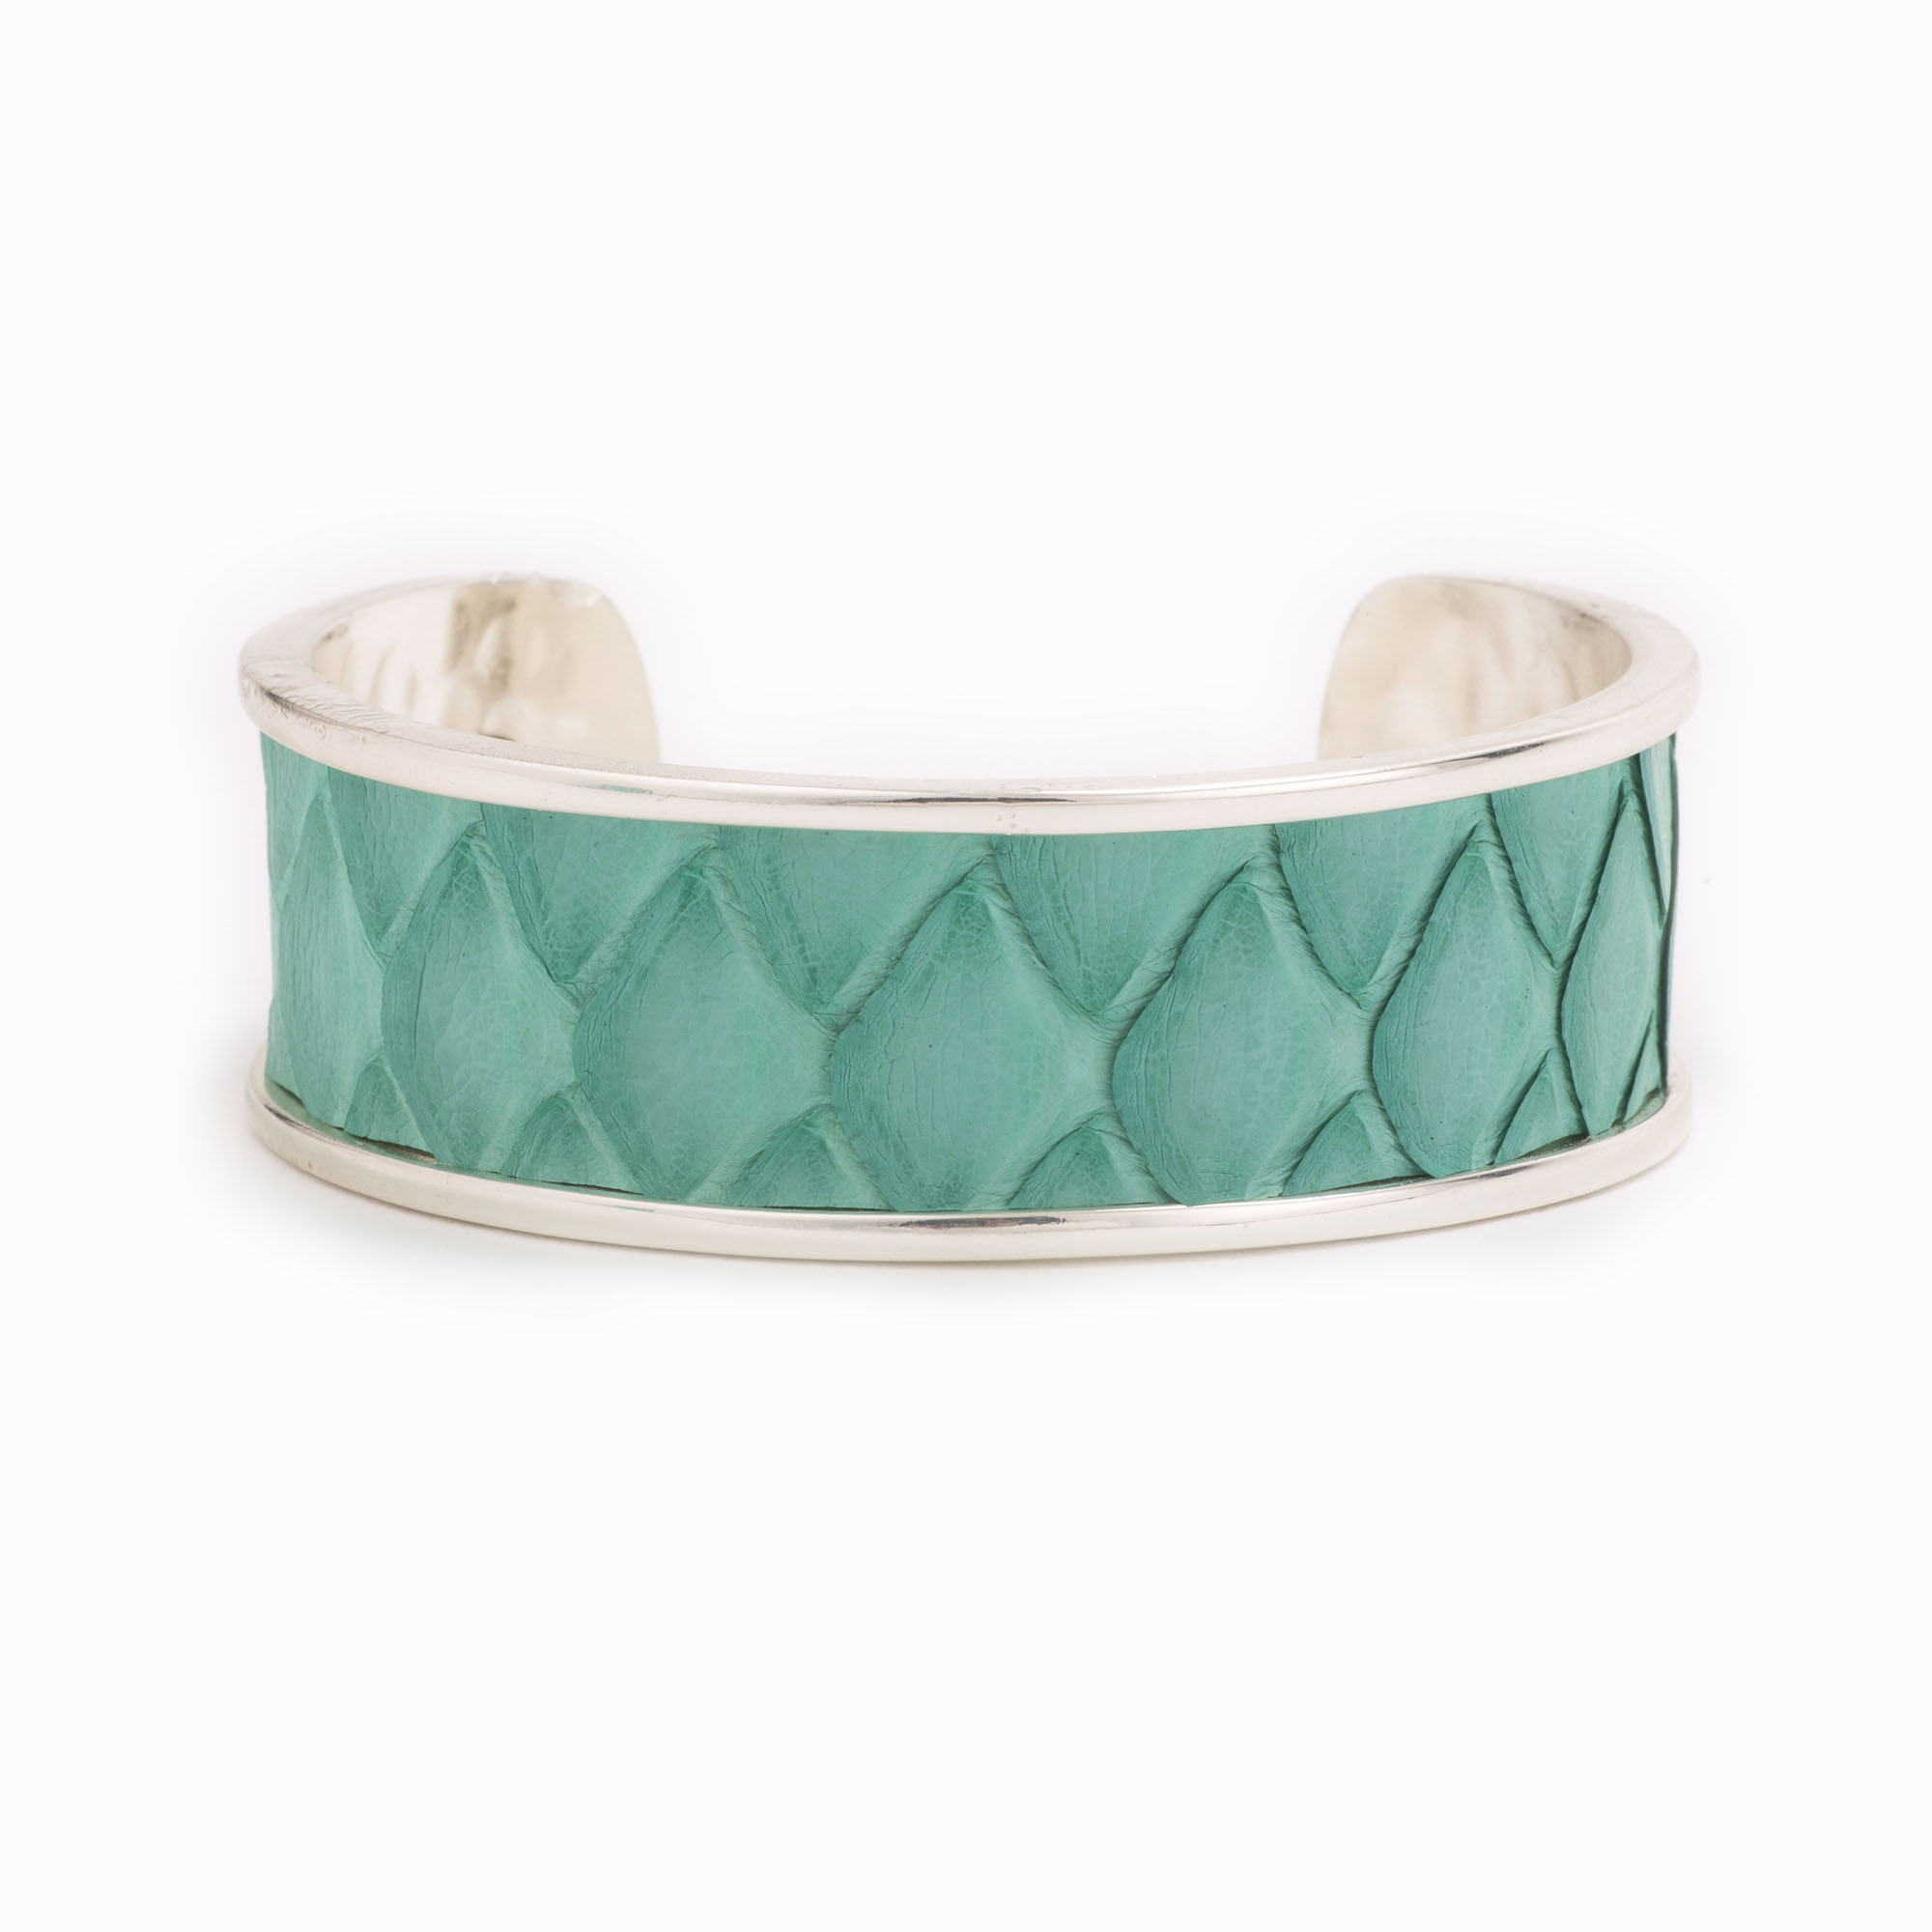 Featured image for “Medium Turquoise Silver Cuff”